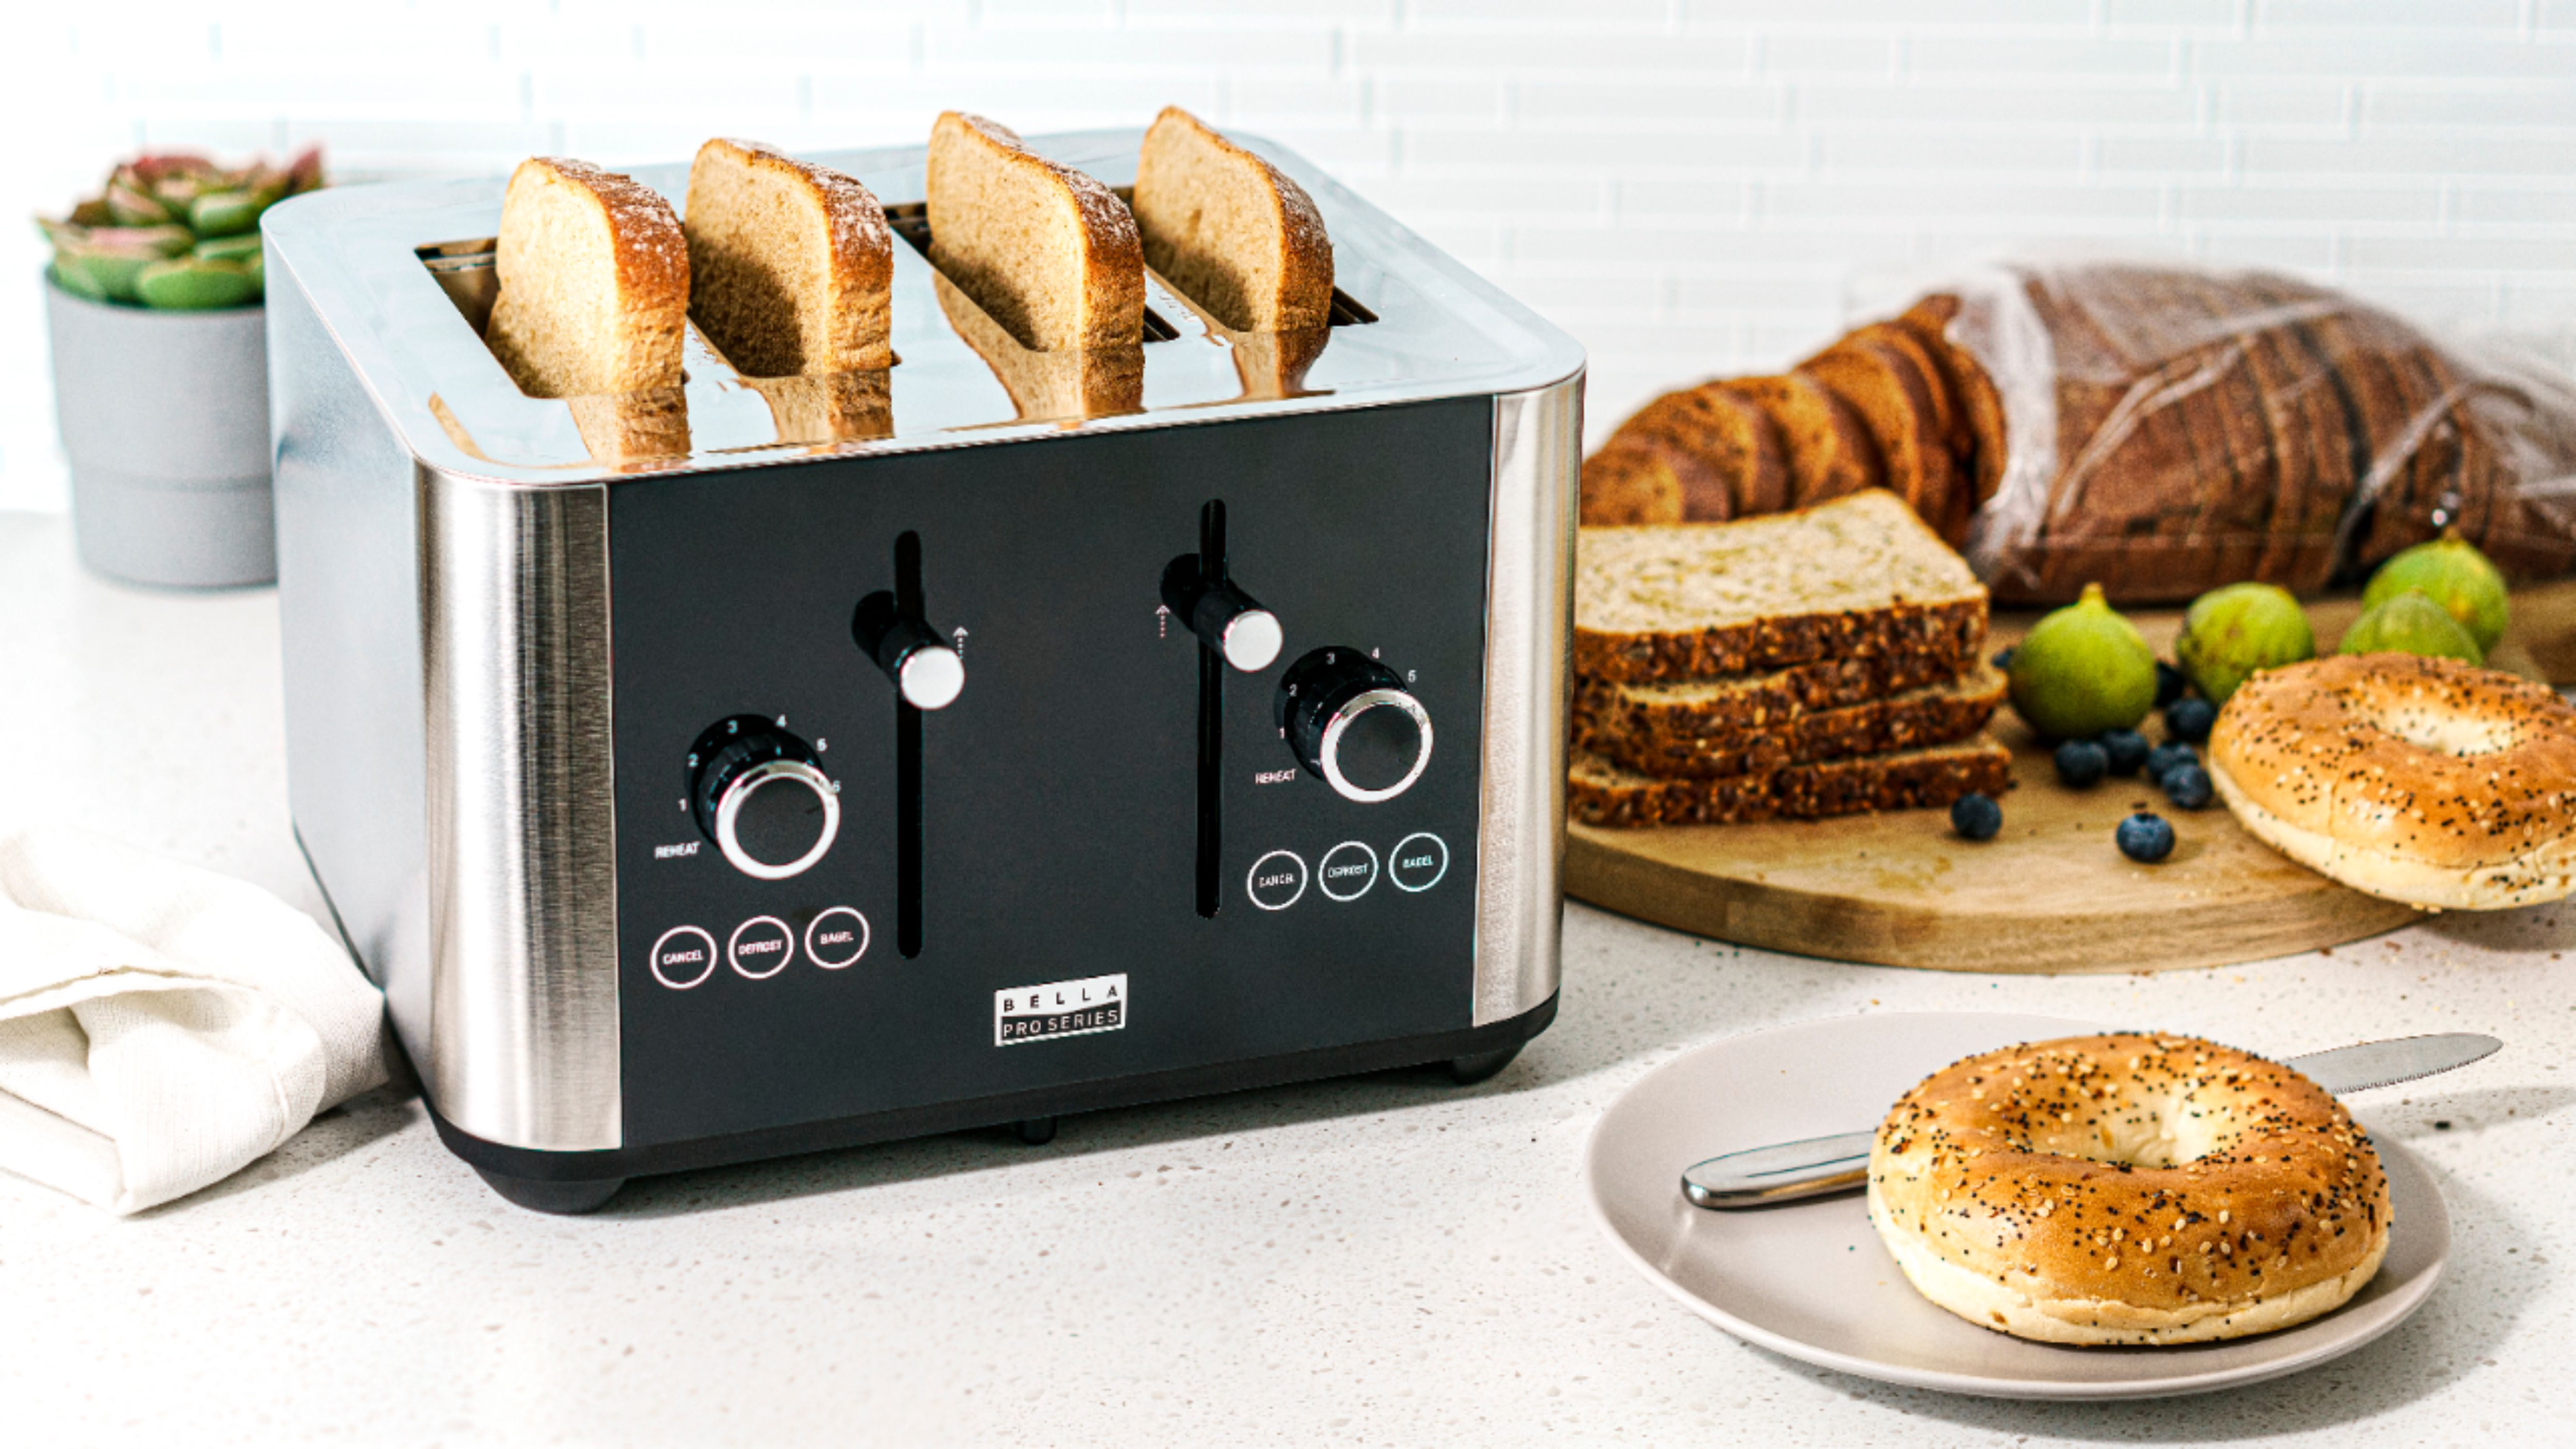 Bella 4 Slice Toaster, Long Slot & Removable Crumb Tray, 7 Shading options with Auto Shut Off, Cancel & Reheat Button, Toast Bread & Bagel, Blue